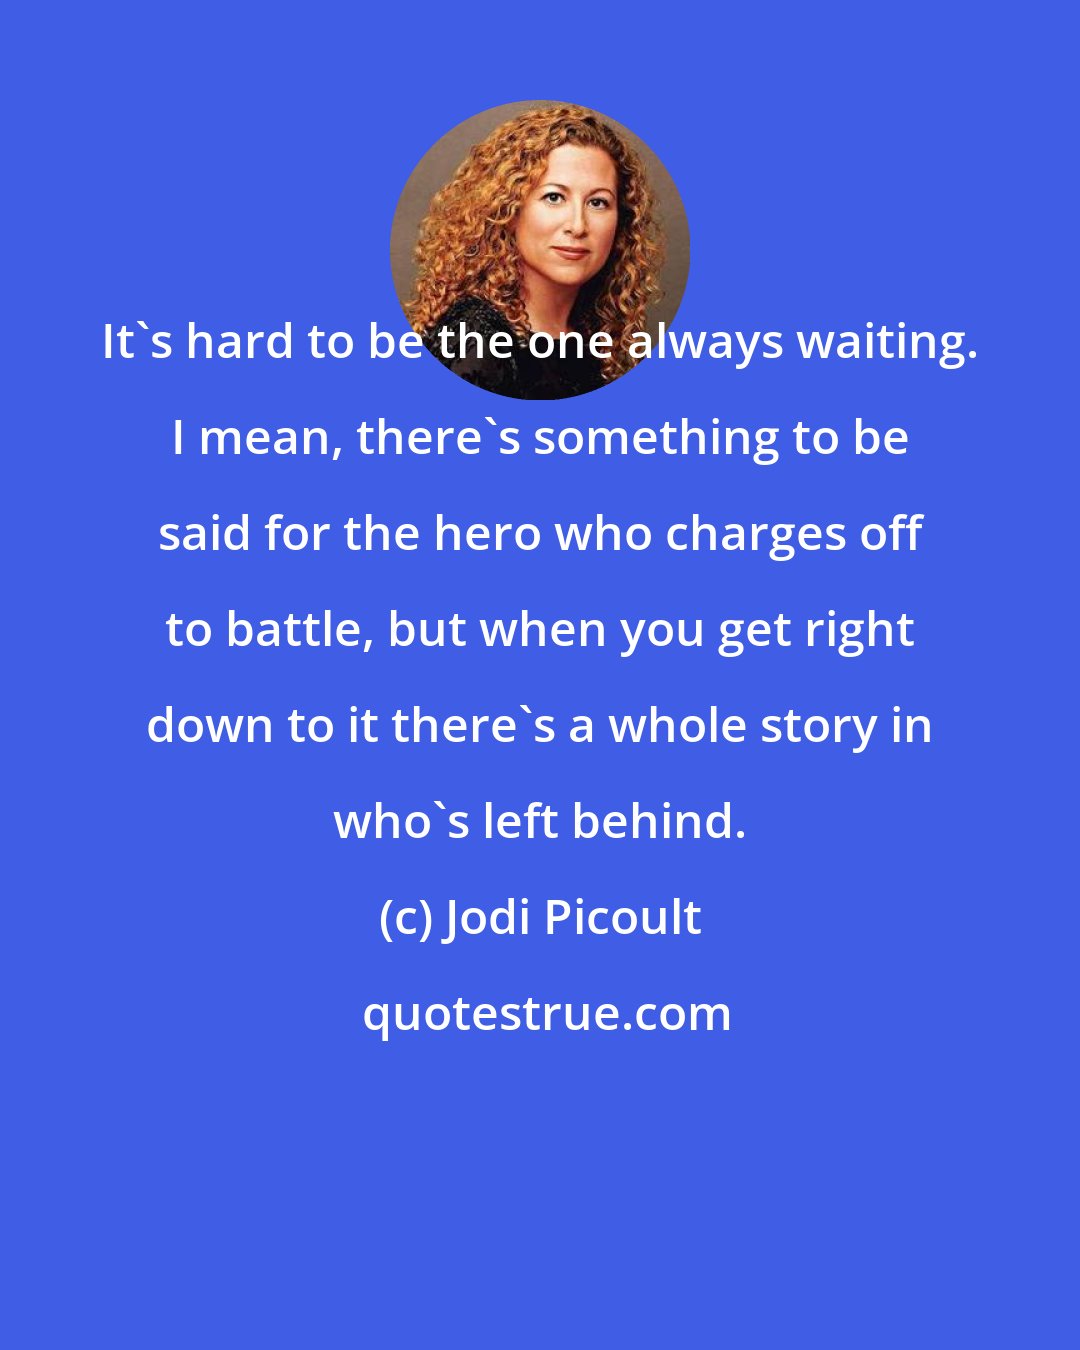 Jodi Picoult: It's hard to be the one always waiting. I mean, there's something to be said for the hero who charges off to battle, but when you get right down to it there's a whole story in who's left behind.